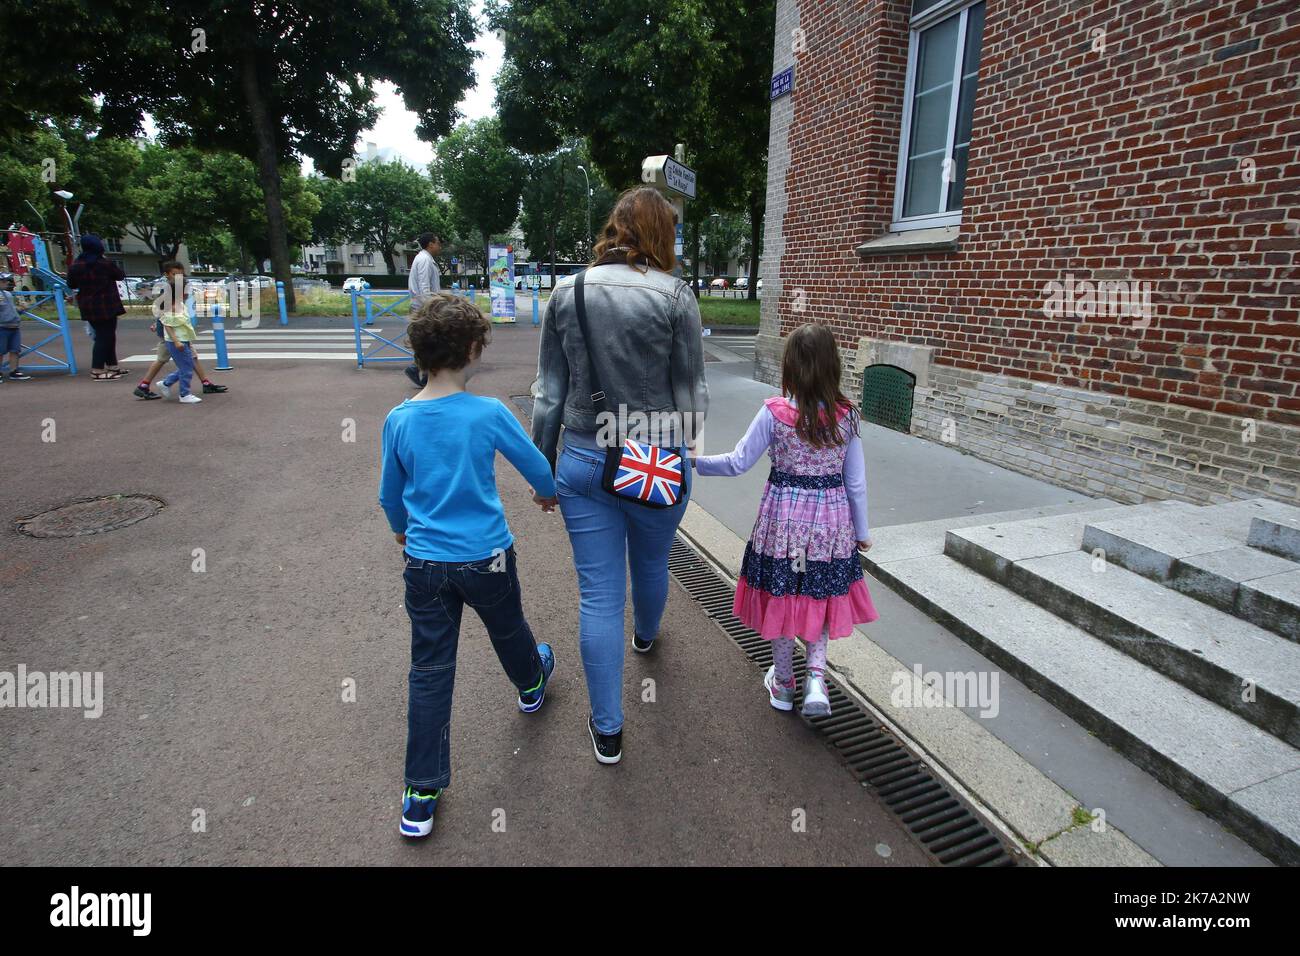 /LE COURRIER PICARD/Fred HASLIN ; Amiens ; 22/06/2020 ; 22/06/20 RentrÃ©e scolaire d'apres covid groupe scolaire Saint Roch Ã  Amiens Photo Fred HASLIN -  2020/06/22. Back to school after the covid-19 pandemic Stock Photo